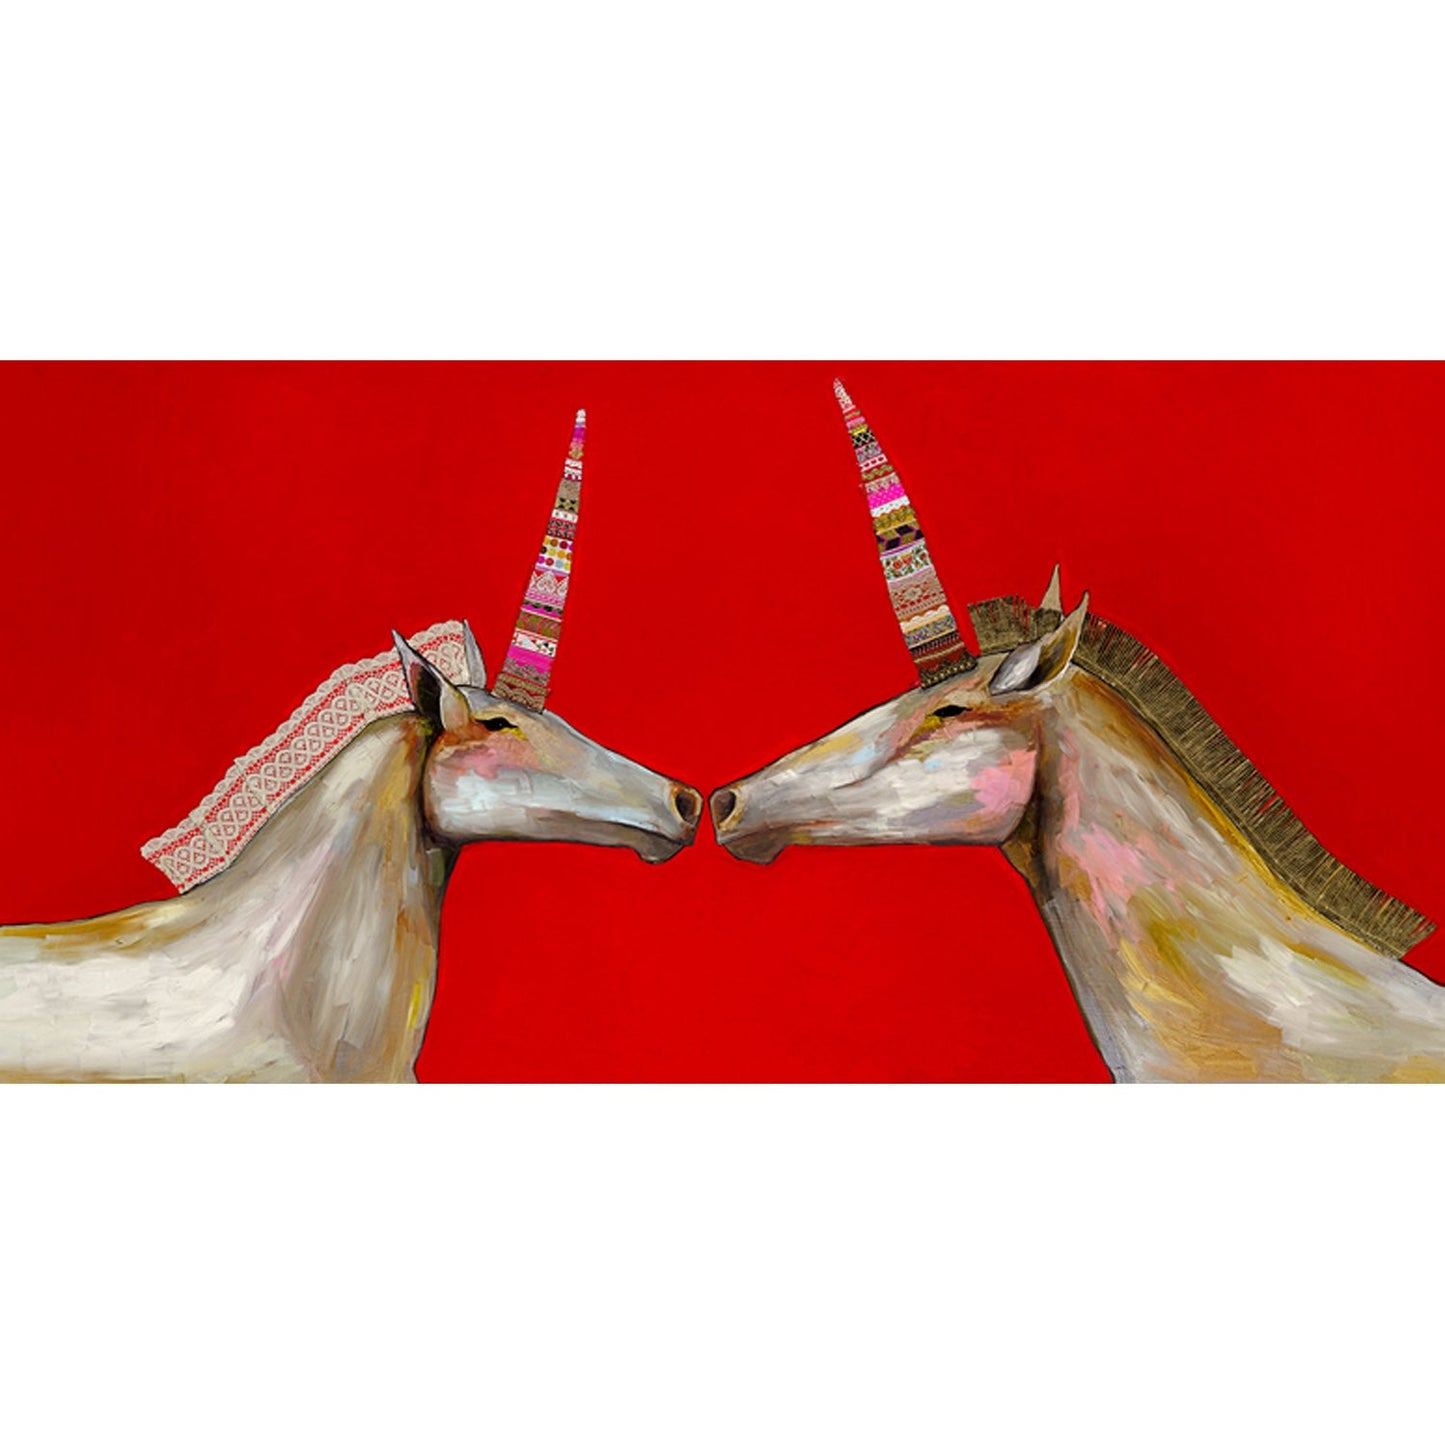 Unicorns With Patterned Horns Canvas Wall Art